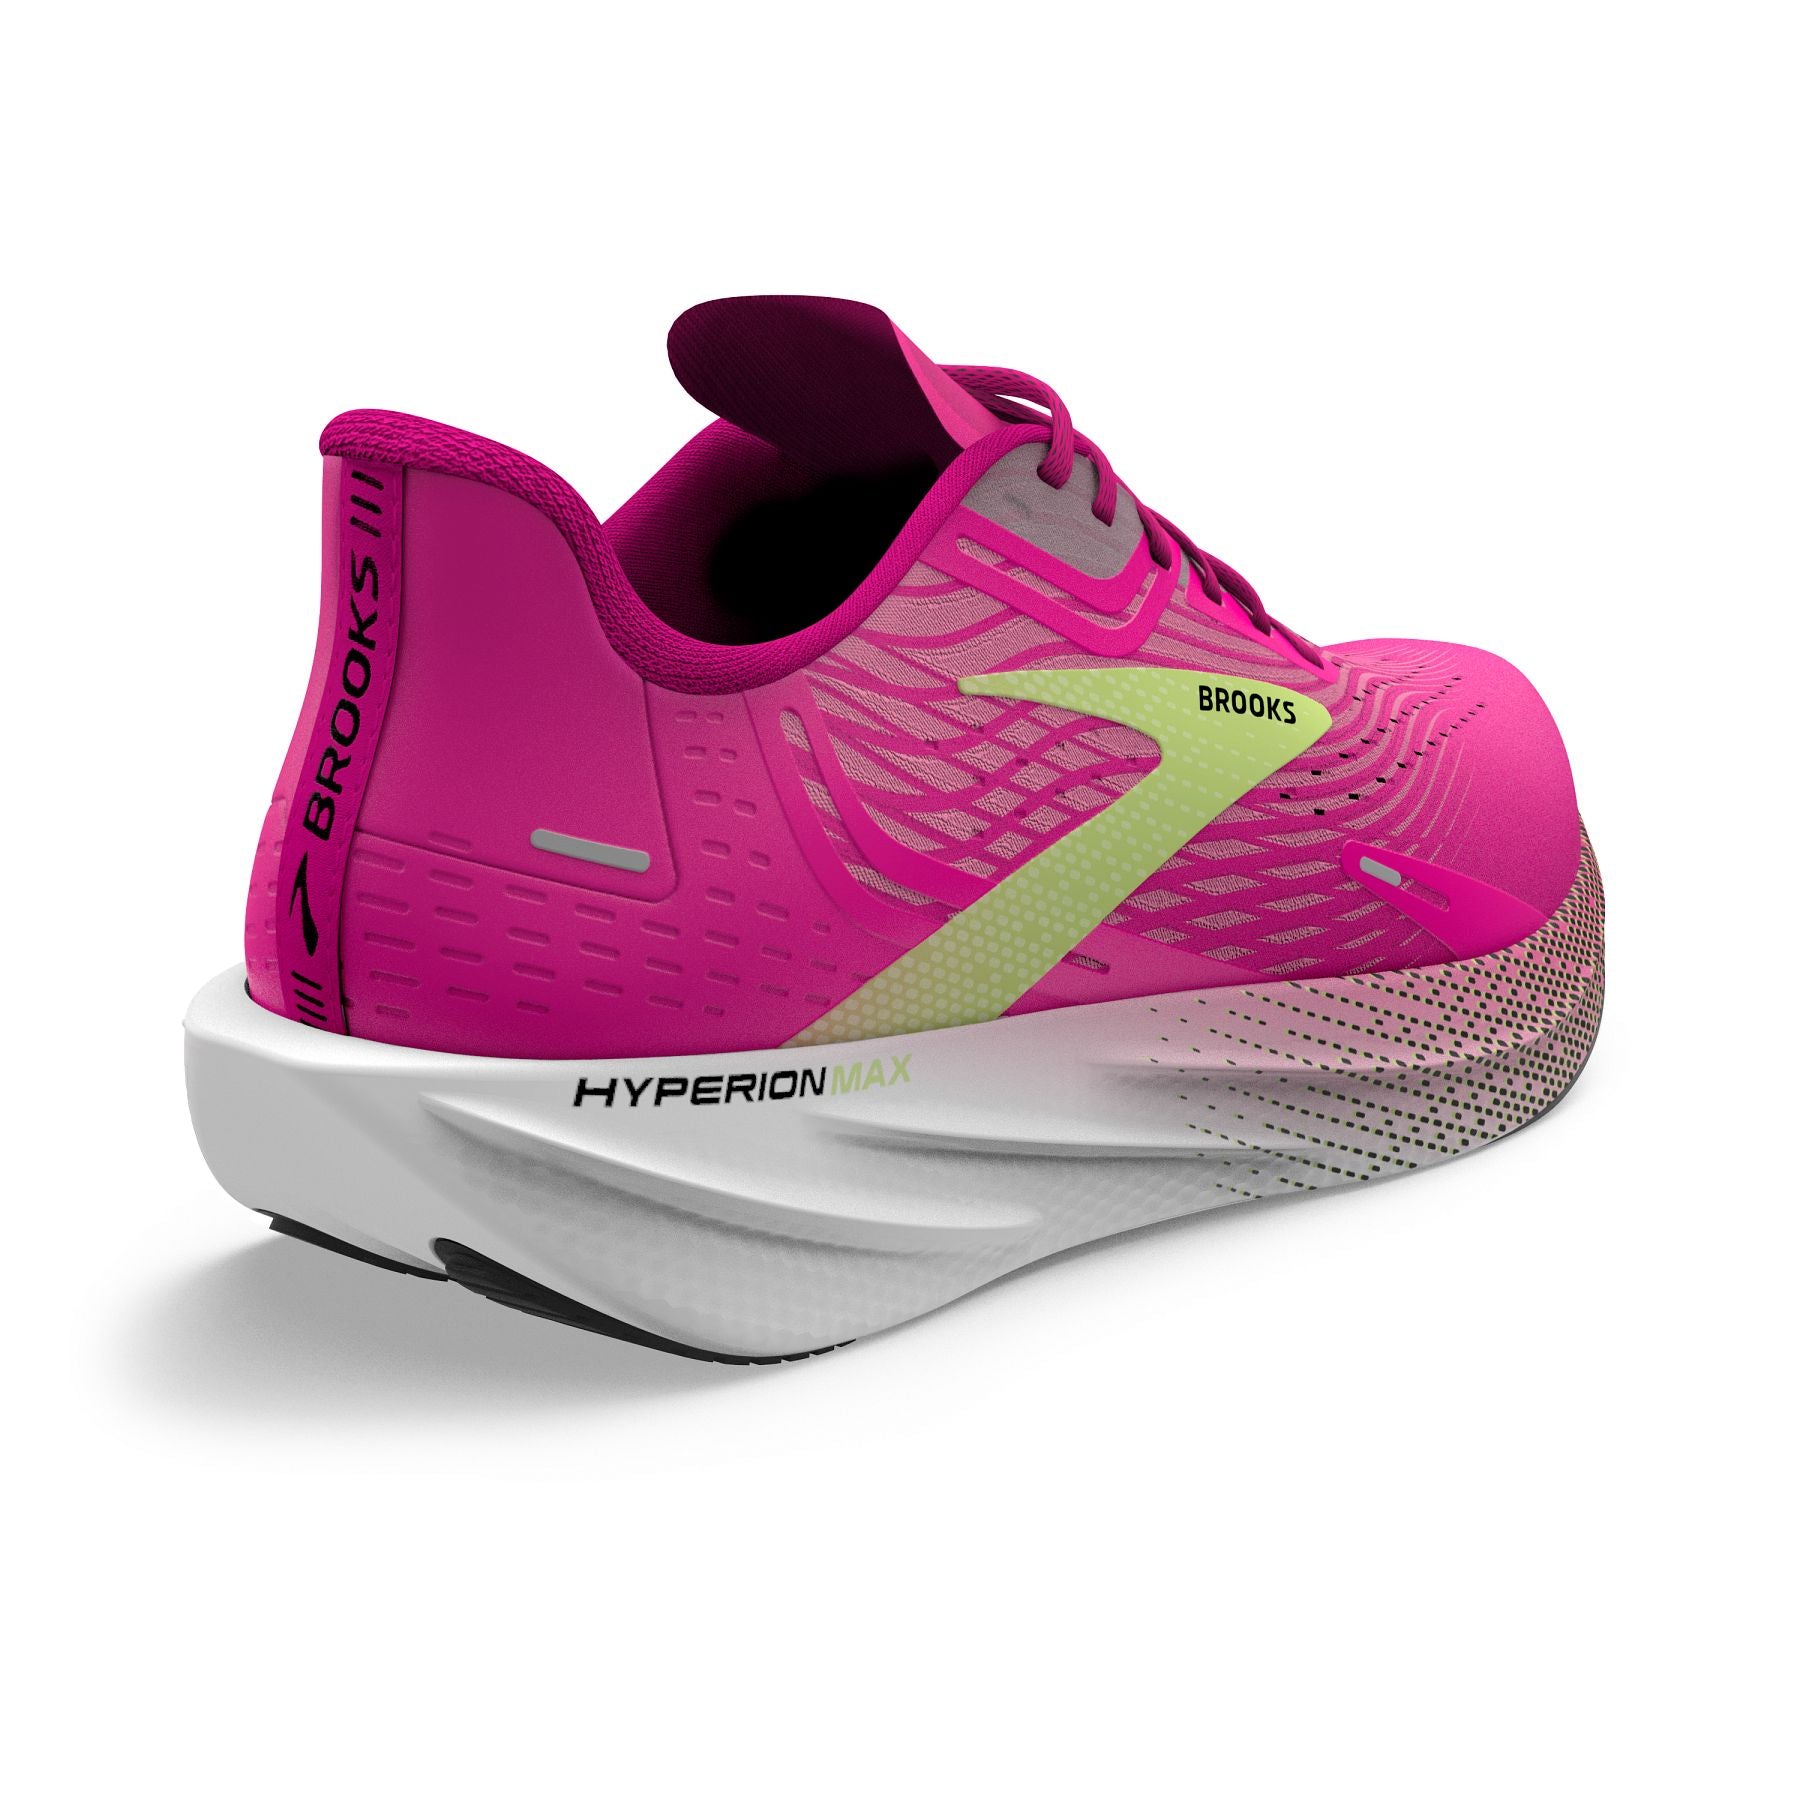 Back angle view of the Women's Hyperion Max by Brook's in the color Pink Glo/Green/Black